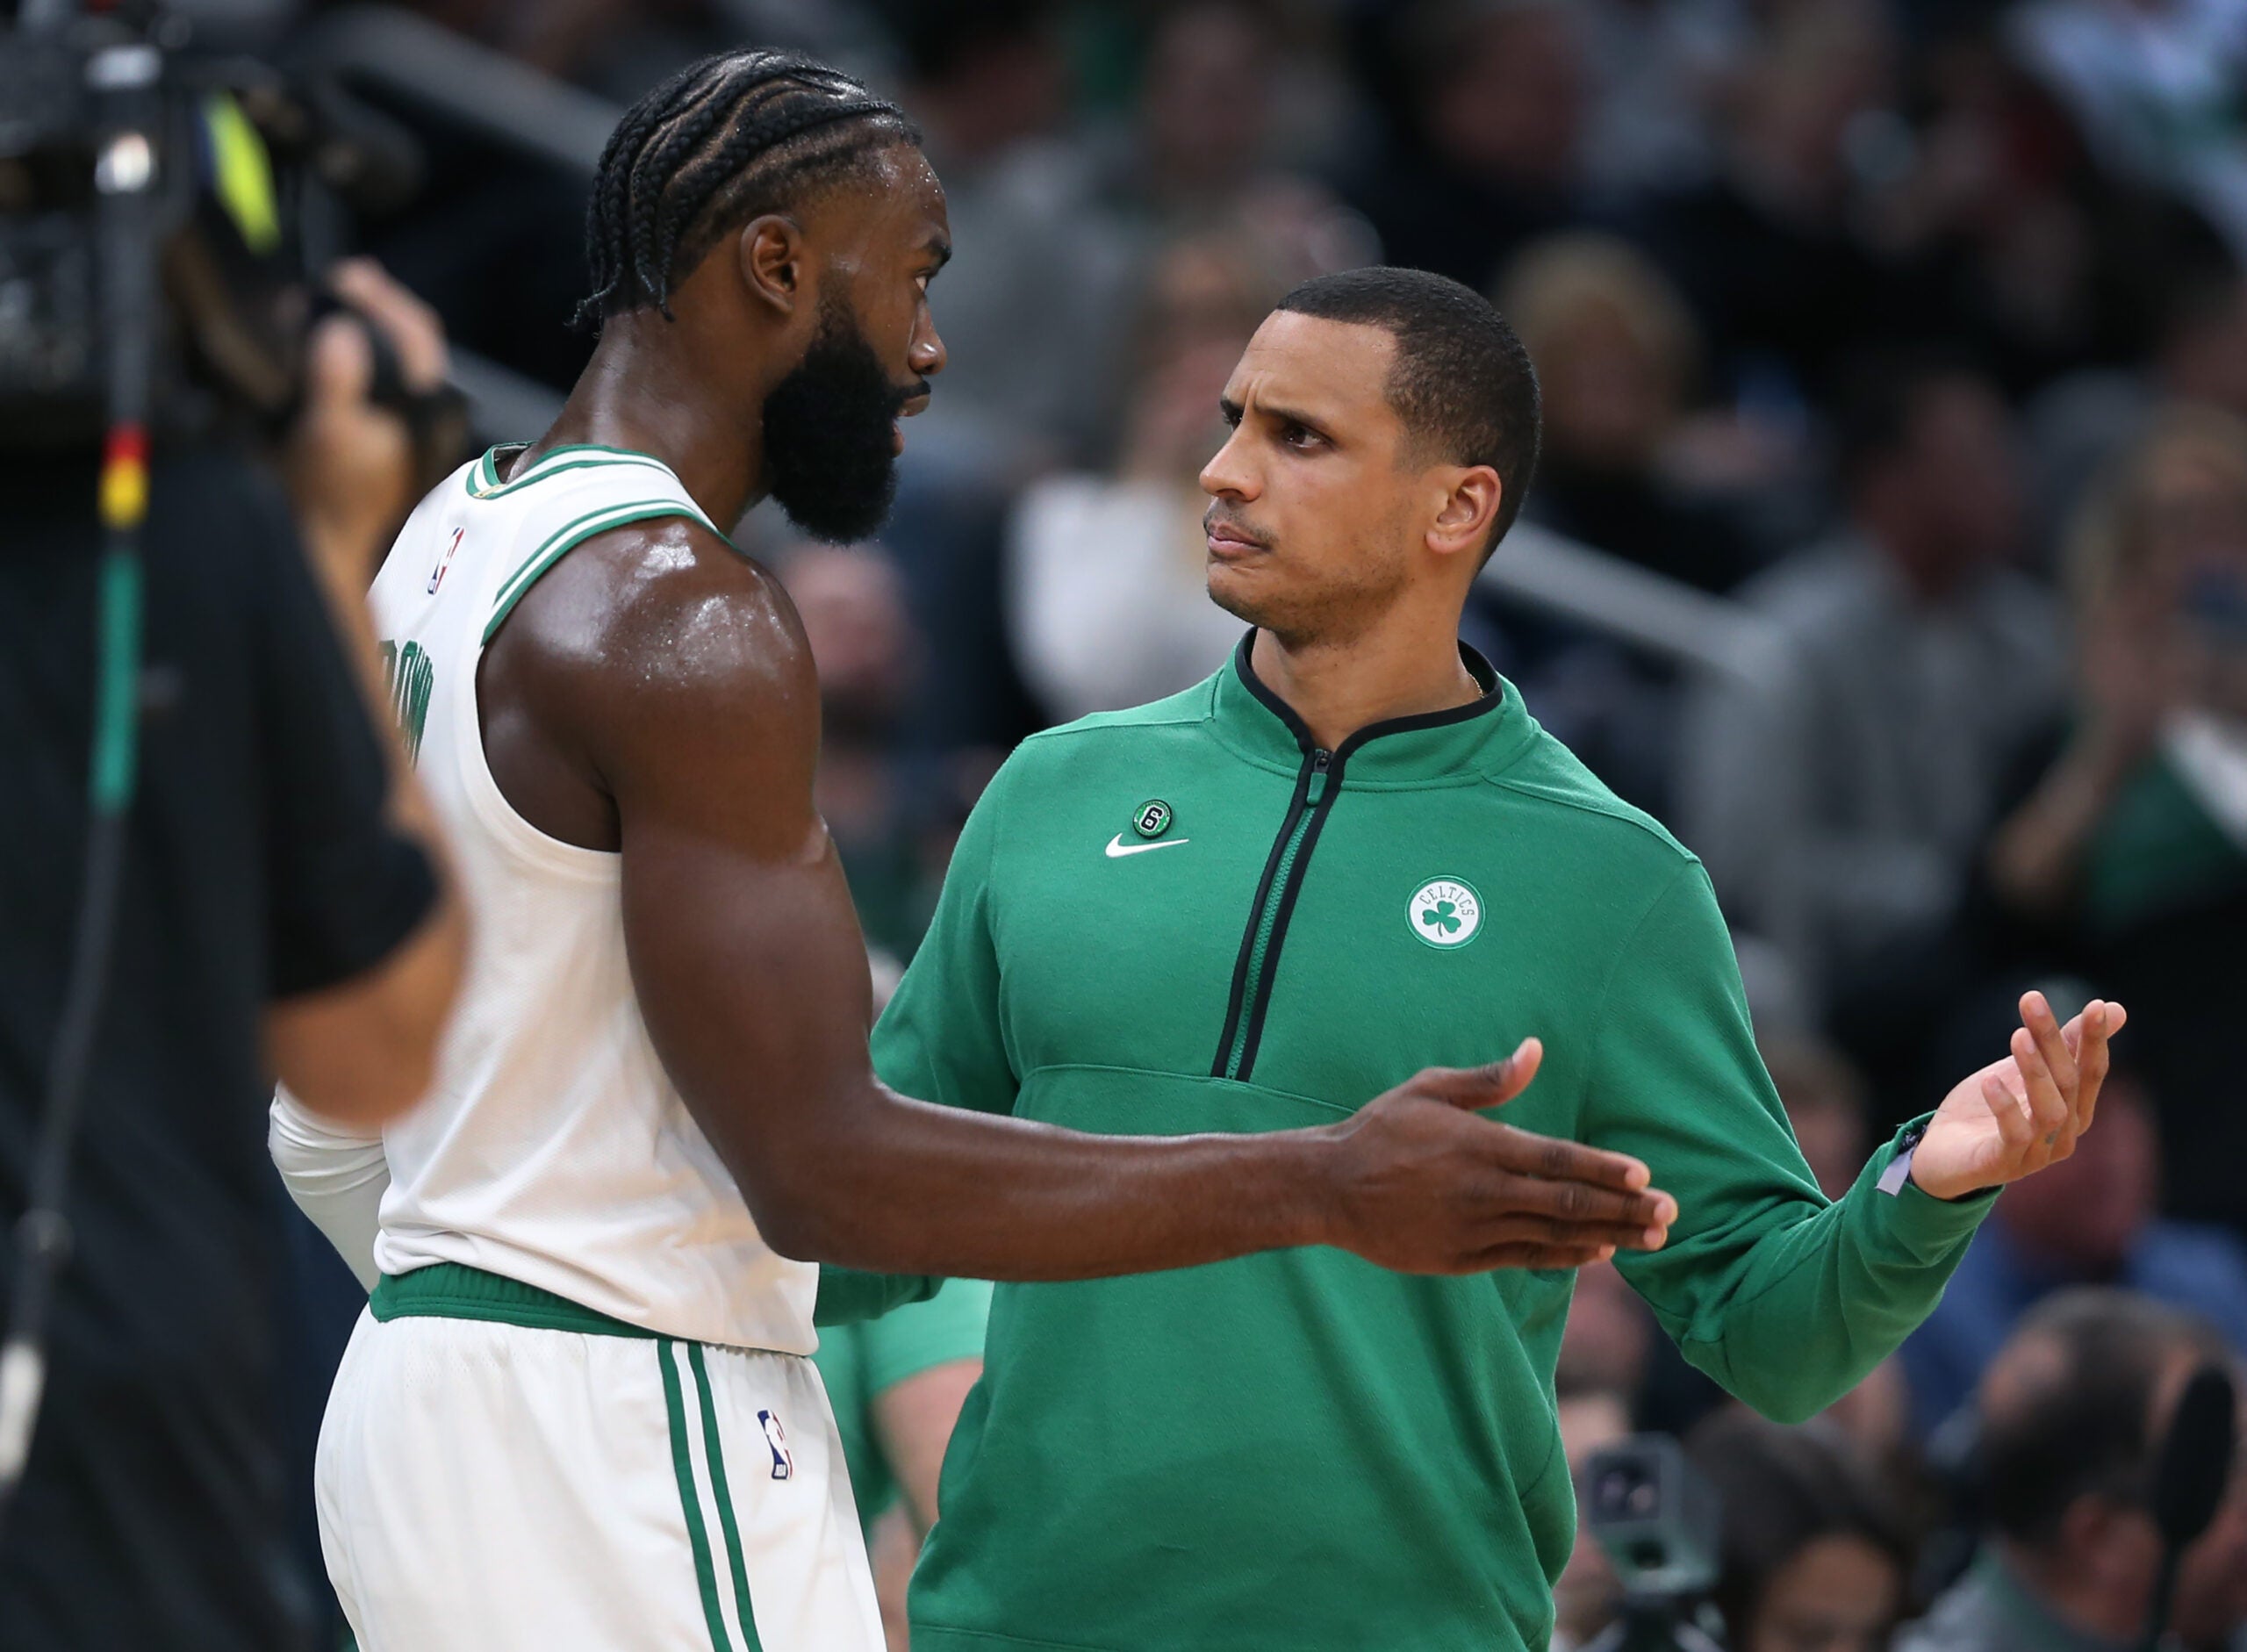 Joe Mazzulla (right) and Jaylen Brown (left) have an animated conversation on the sideline of a Celtics game.